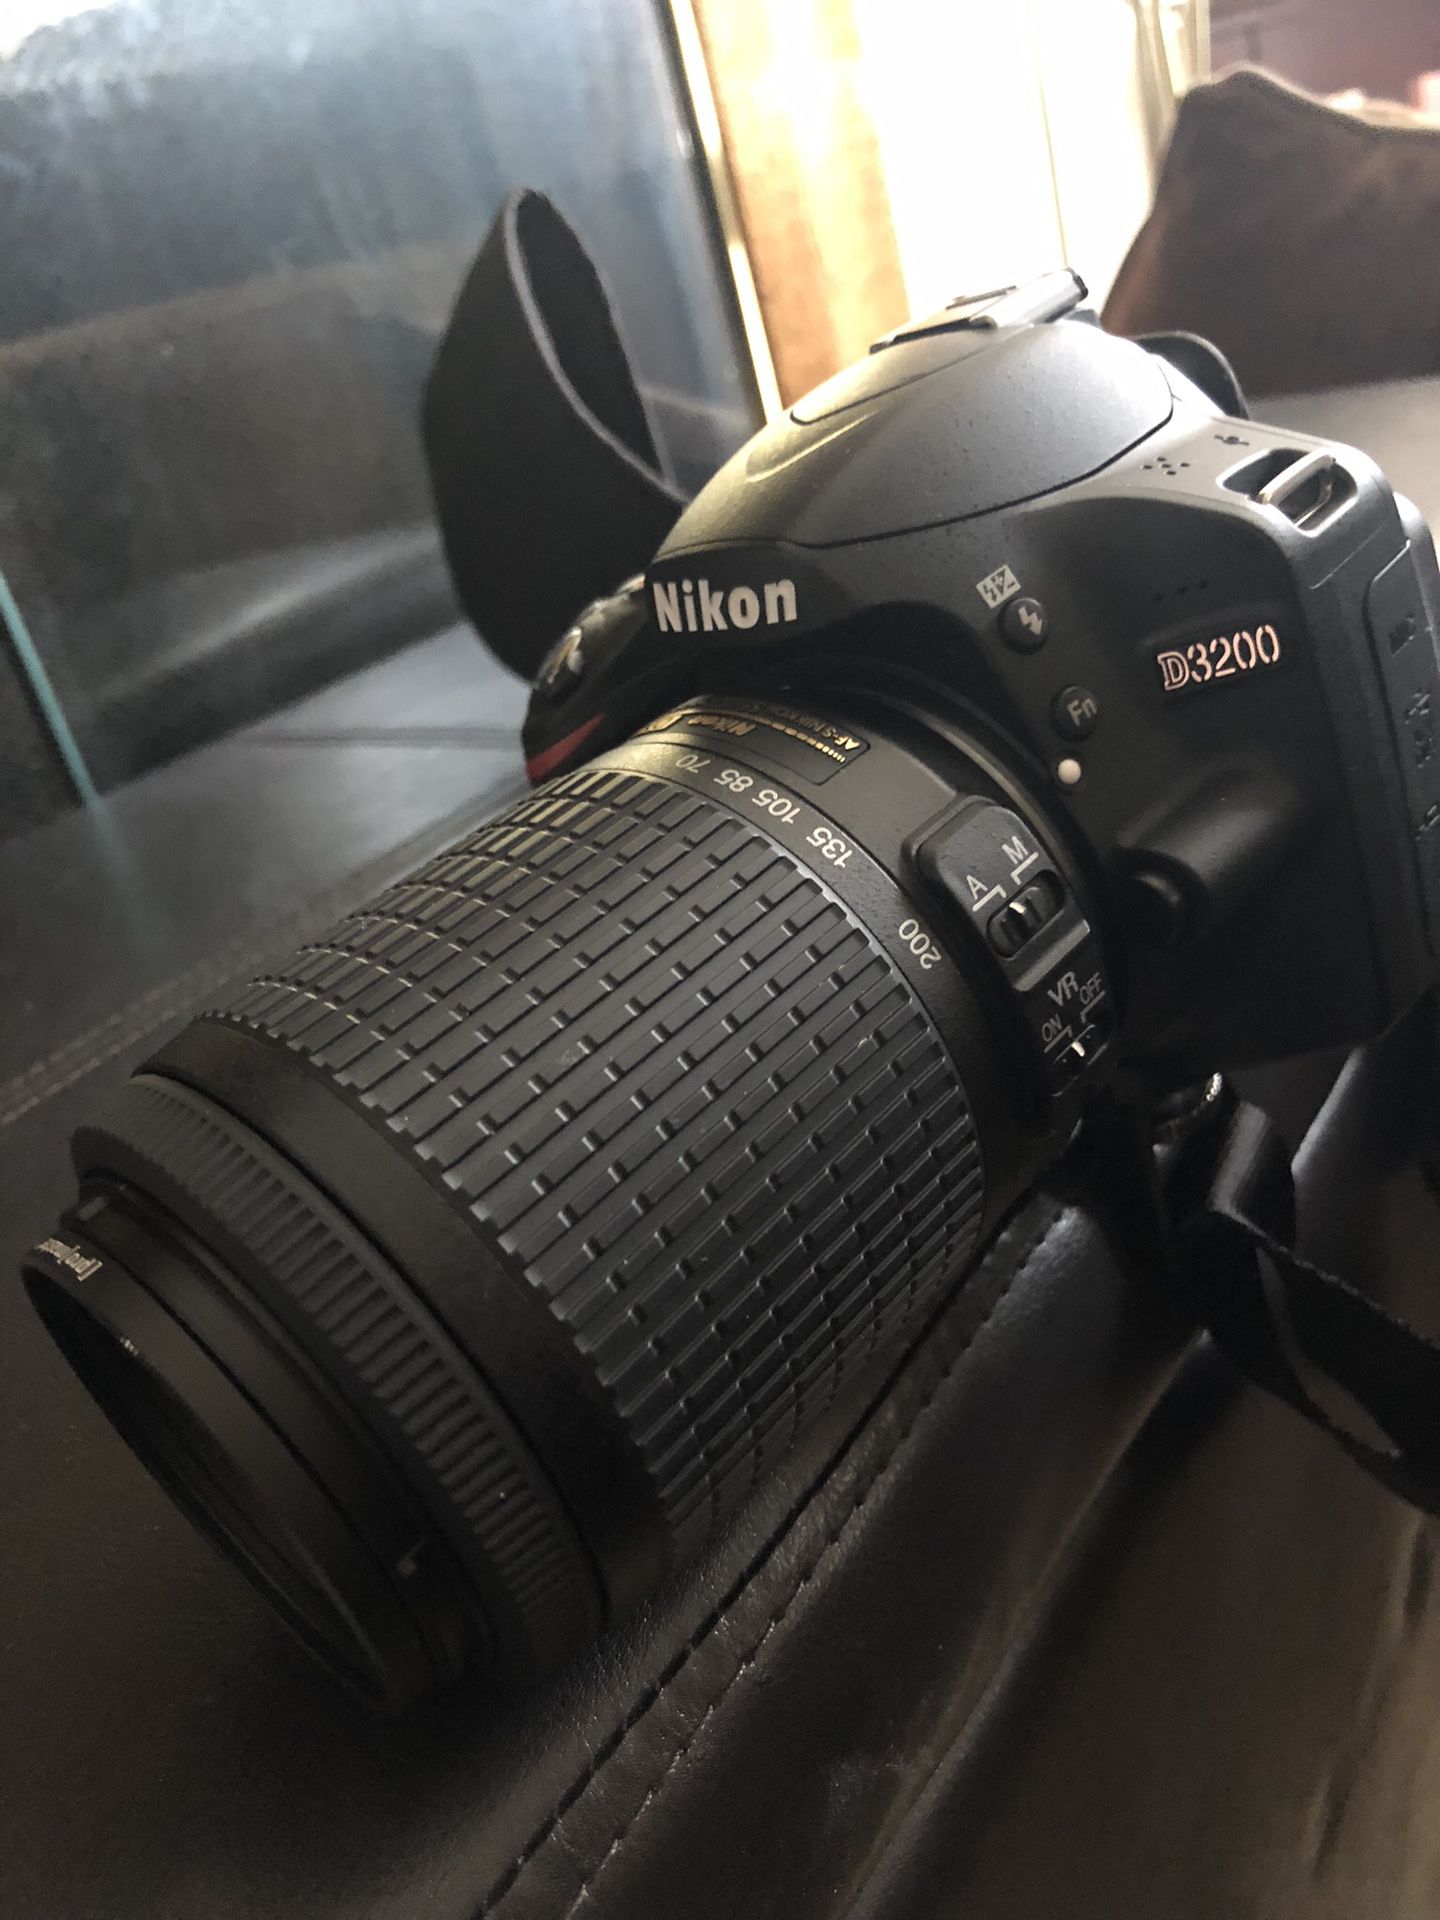 Nikon 3200 with 2 lenses and case and extra battery and tripod. Great condition.